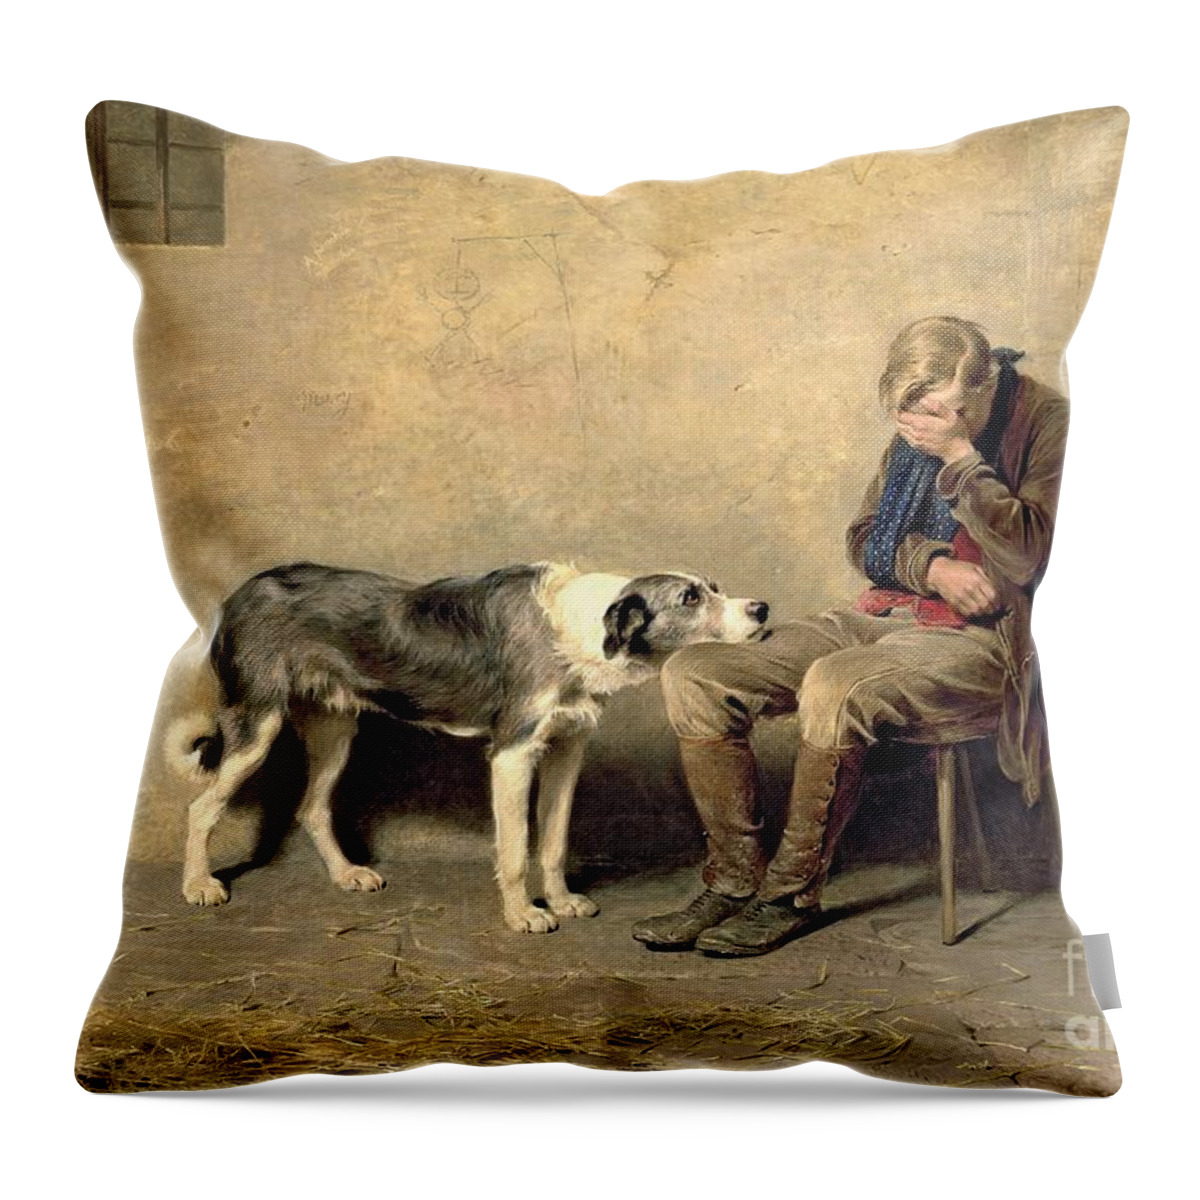 Fidelity Throw Pillow featuring the painting Fidelity by Briton Riviere